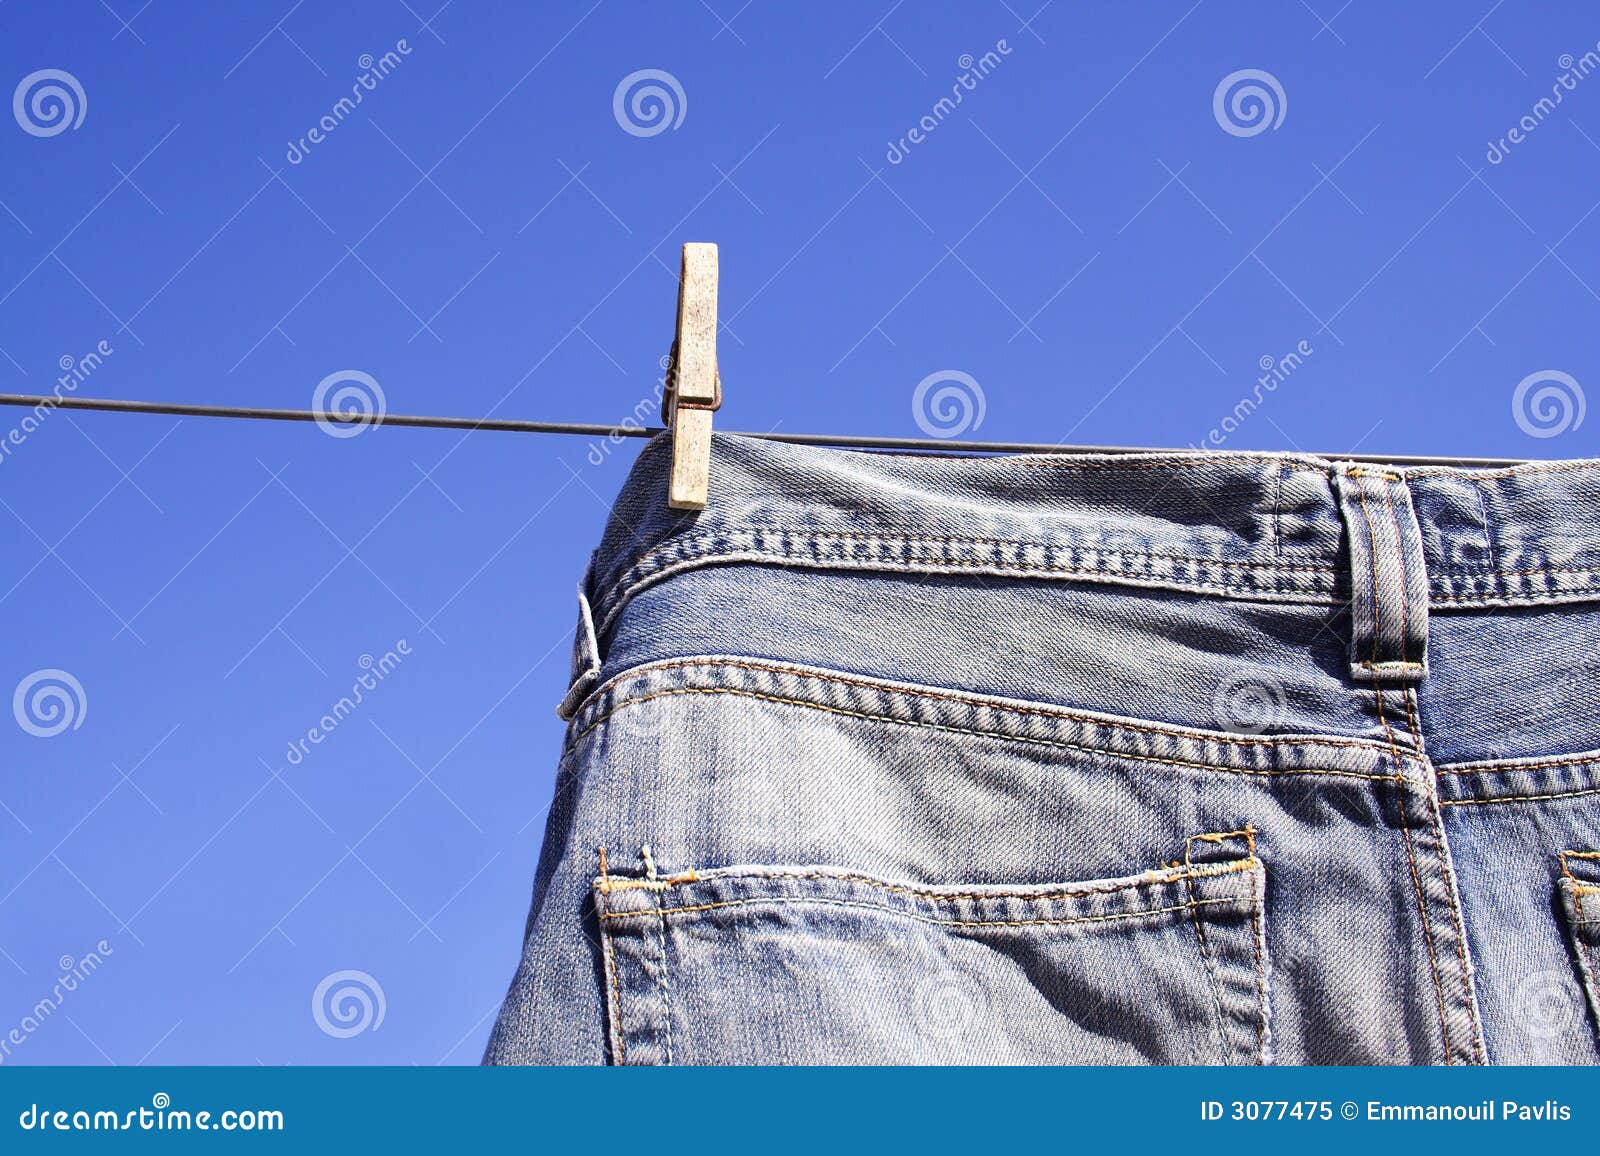 Jeans Pegged To the Wash Line Stock Image - Image of wash, drying: 3077475